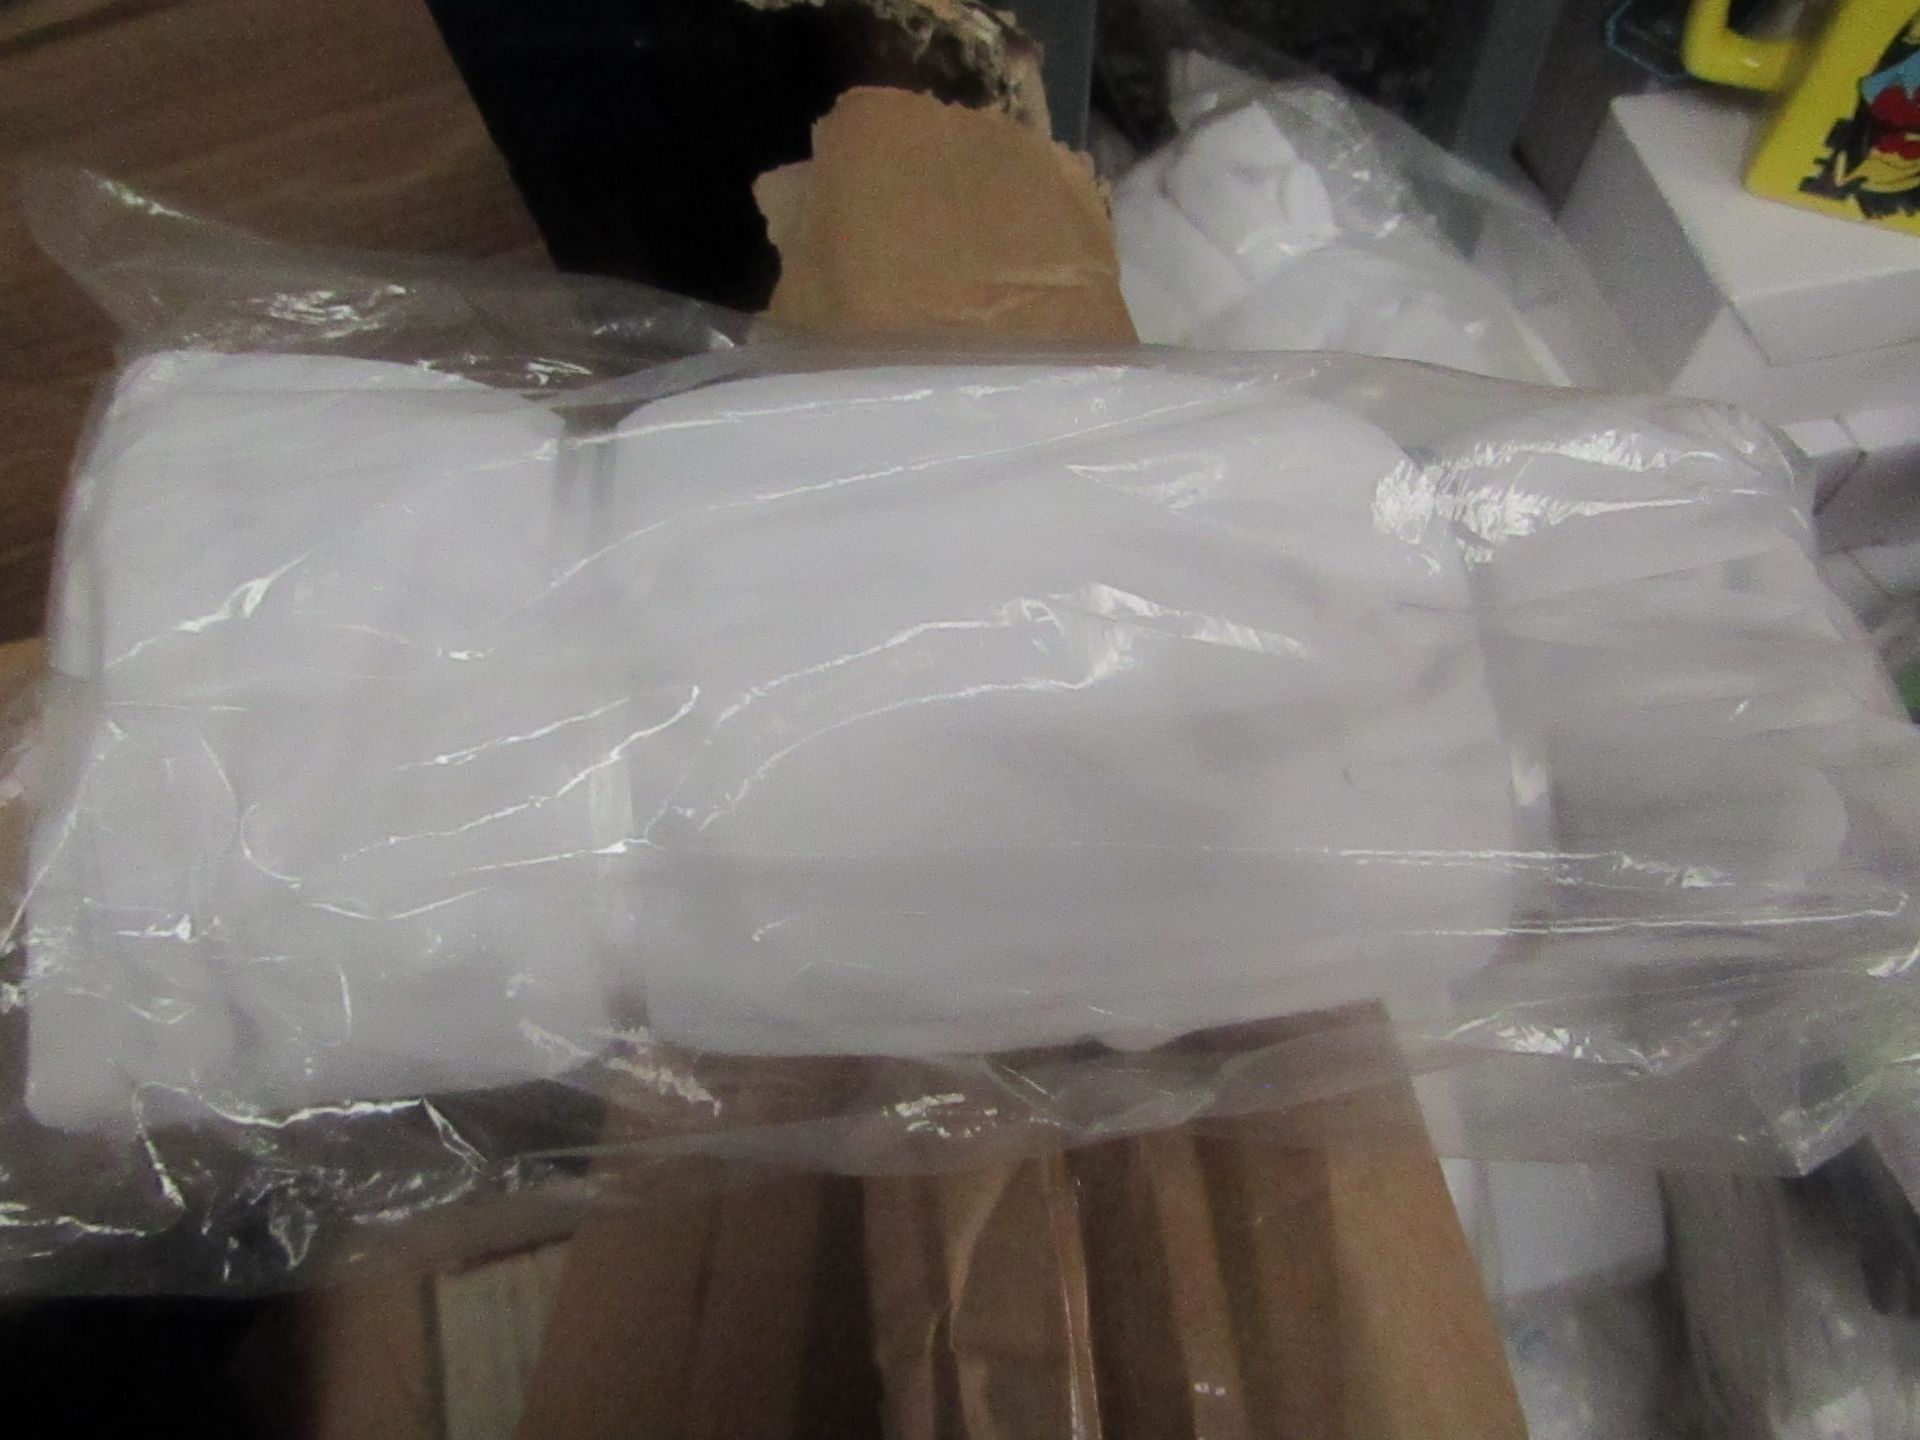 20 x White XL Gloves. New & Packaged